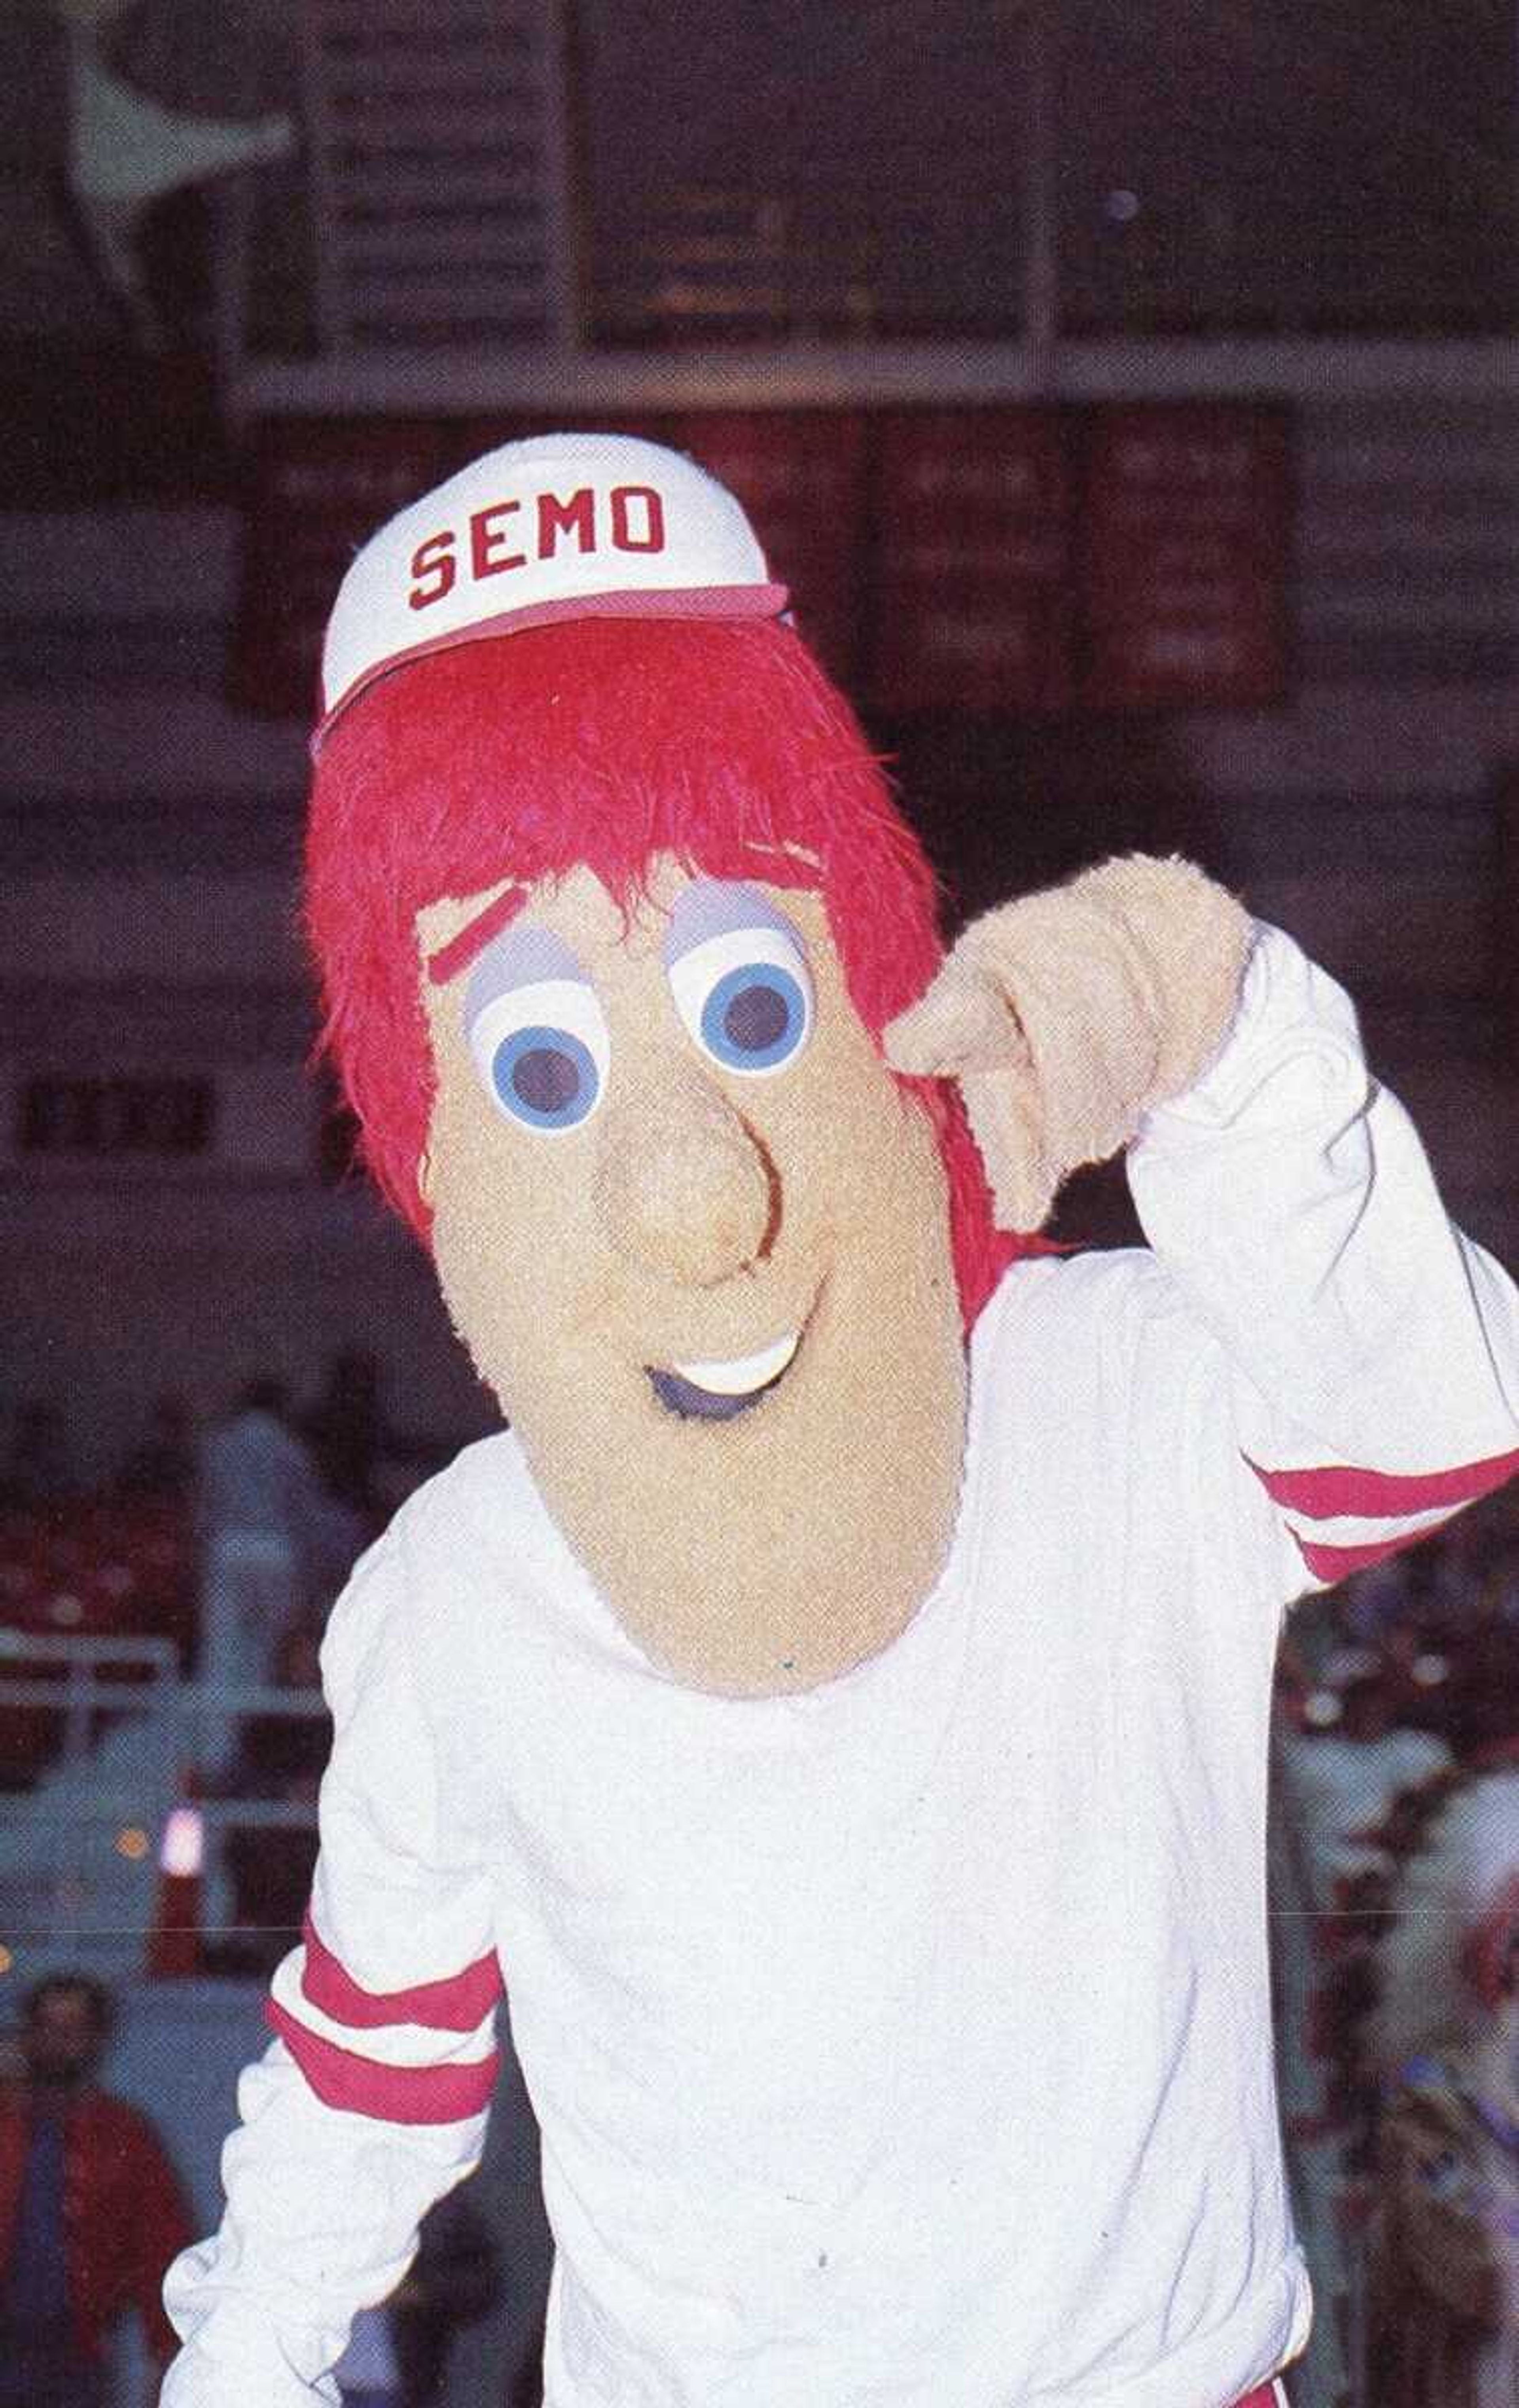 The forgotten face of one SEMO athletics mascot